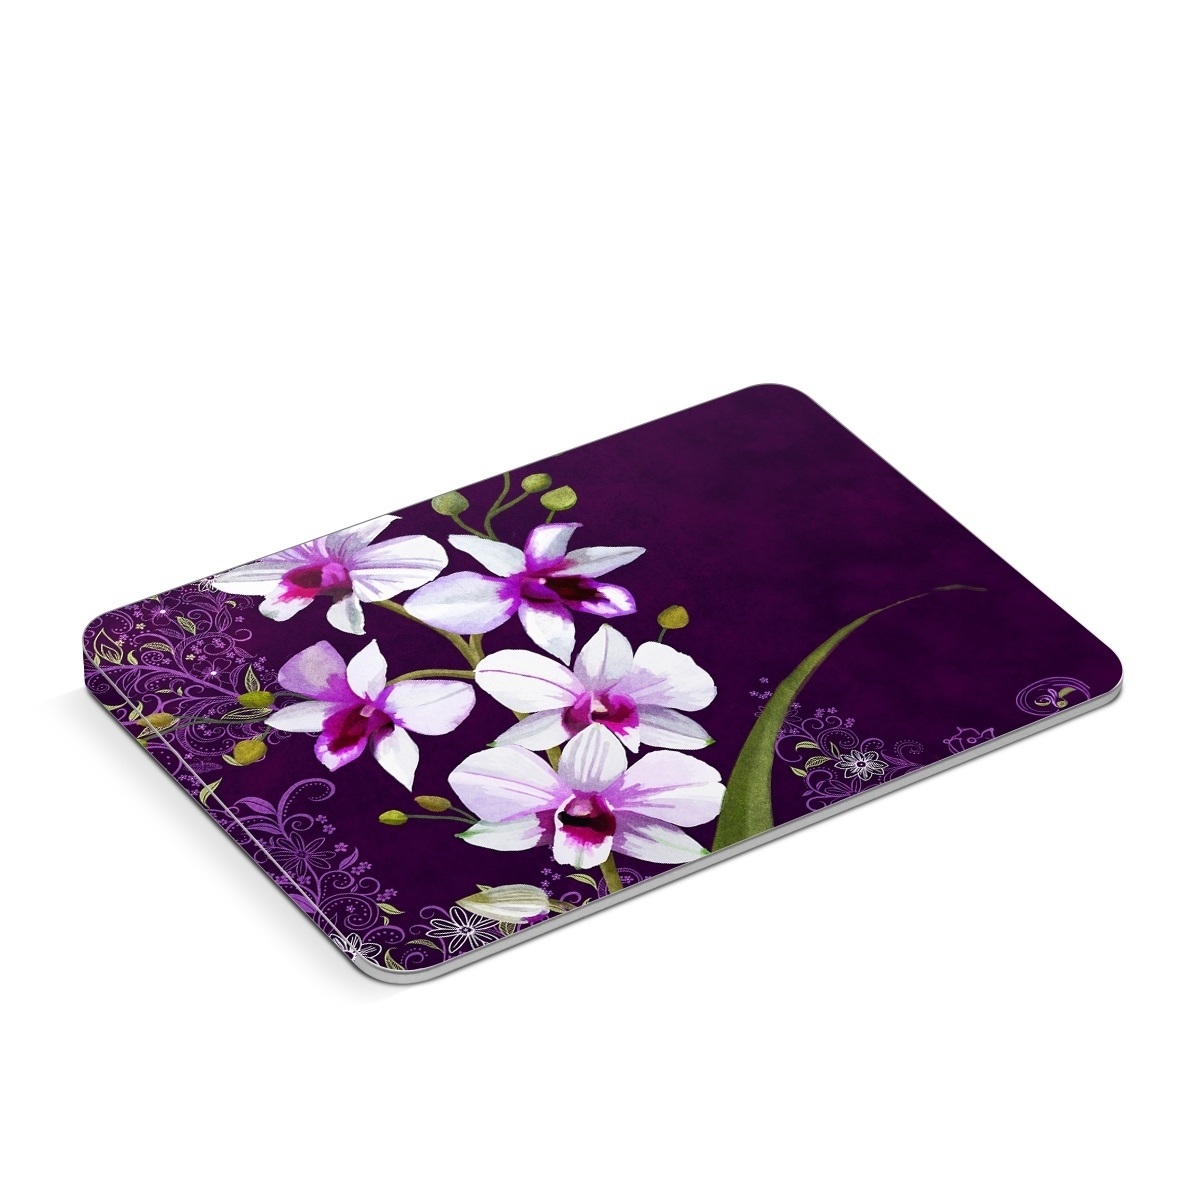 Apple Magic Trackpad Skin design of Flower, Purple, Petal, Violet, Lilac, Plant, Flowering plant, cooktown orchid, Botany, Wildflower, with black, gray, white, purple, pink colors